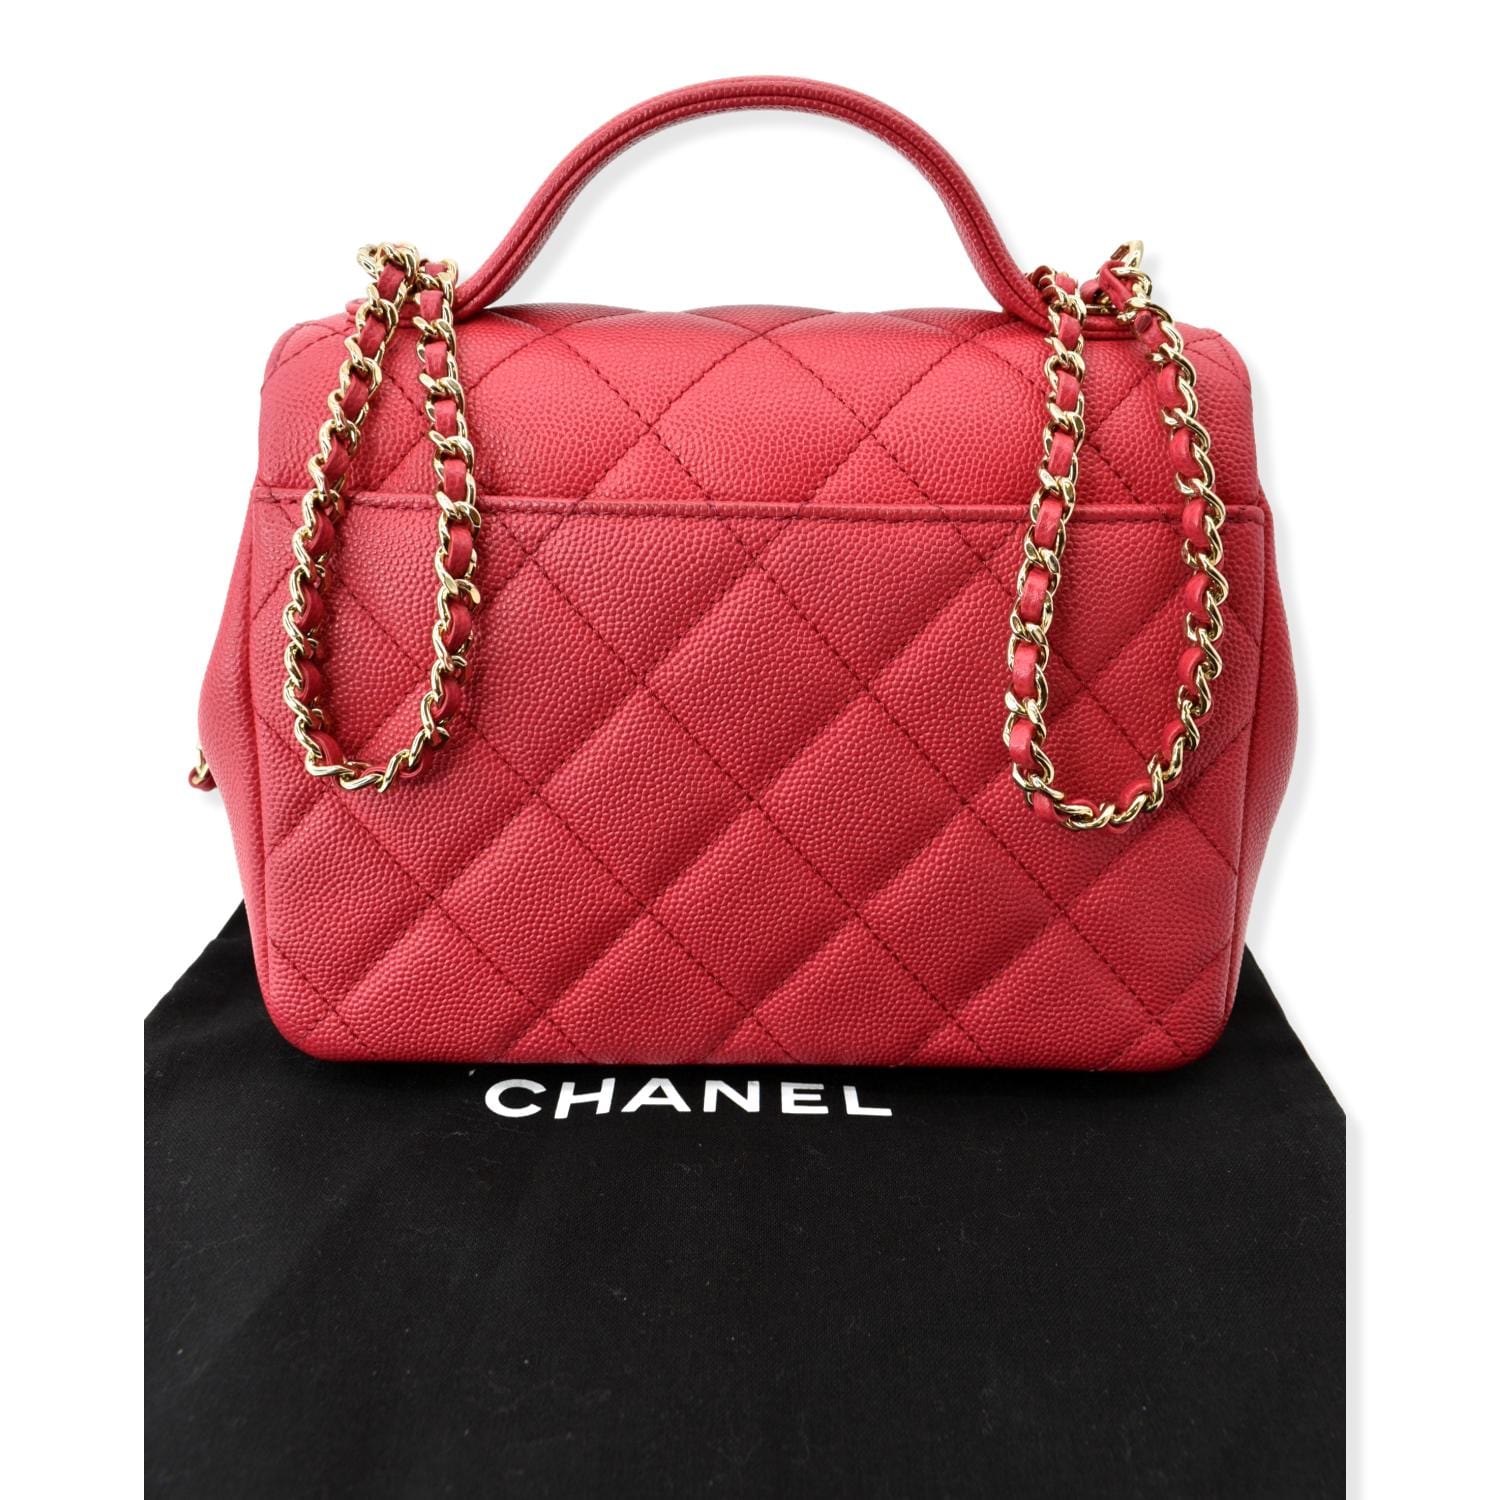 CHANEL, Bags, Chanel Business Affinity Bag Small Size